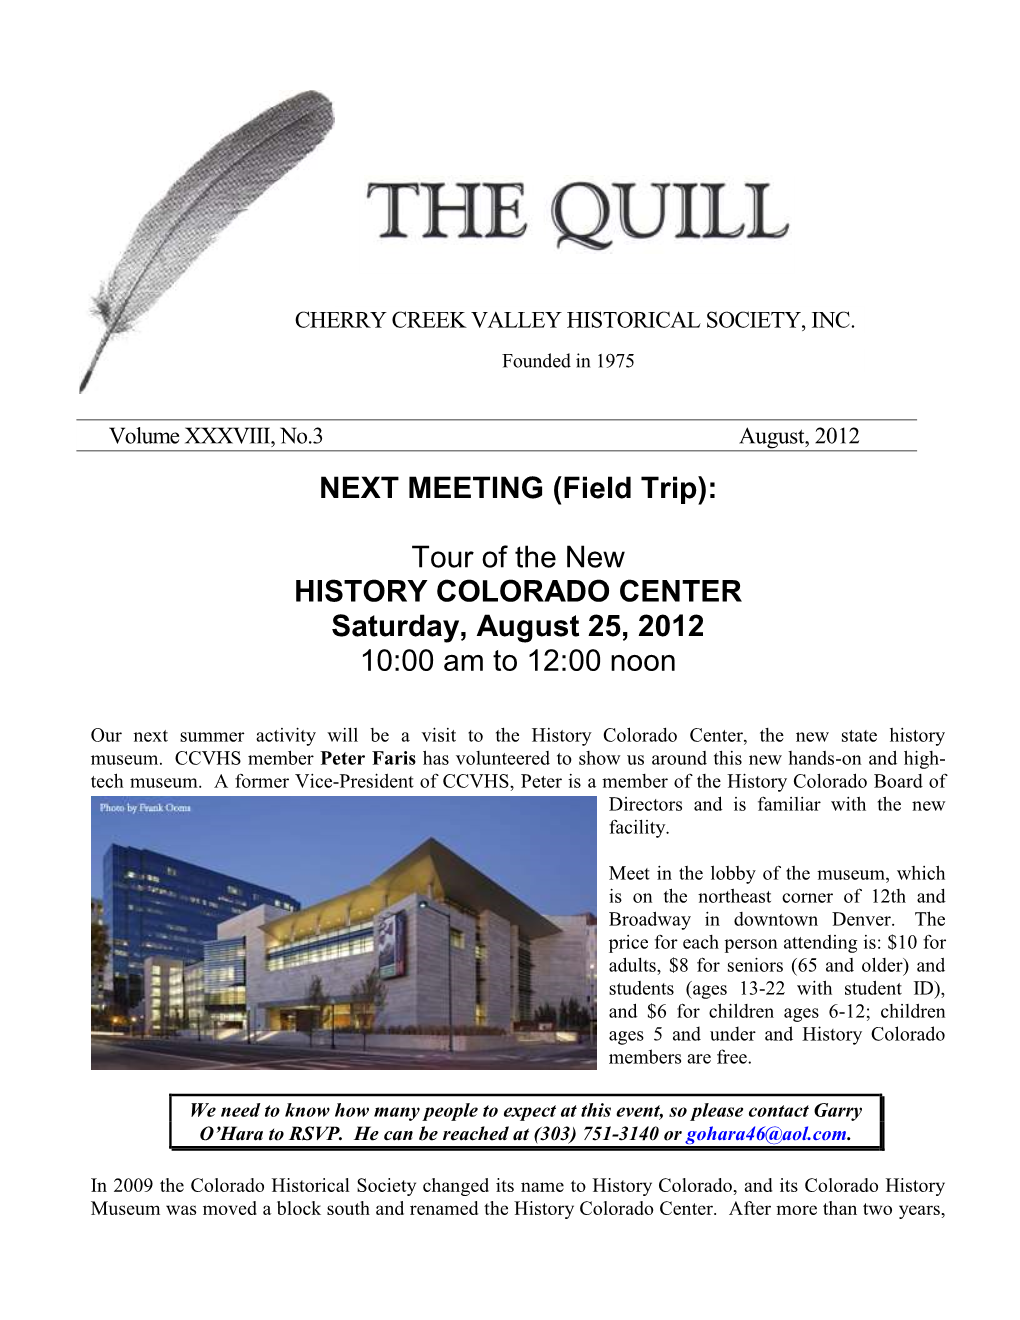 NEXT MEETING (Field Trip): Tour of the New HISTORY COLORADO CENTER Saturday, August 25, 2012 10:00 Am to 12:00 Noon